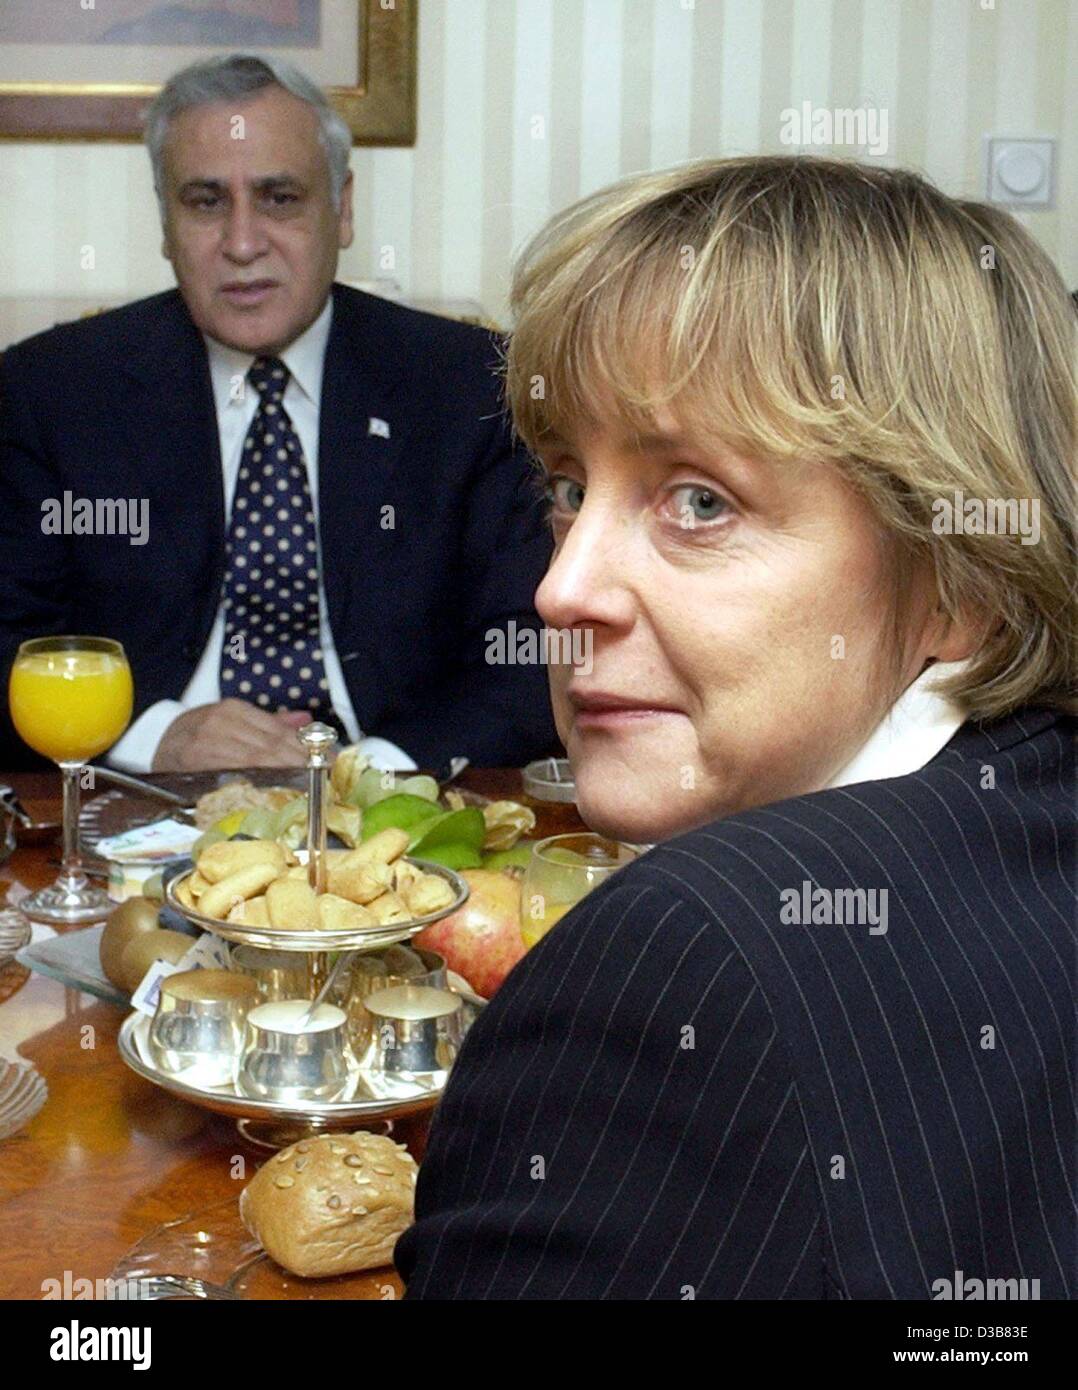 (dpa) - Israeli President Moshe Katsav and CDU chairwoman Angela Merkel are having breakfast, Berlin, 10 December 2002. During the meeting Merkel assured her party's constant support for Israel. She informed later that she made clear the different attitudes of the German government and the oppositio Stock Photo